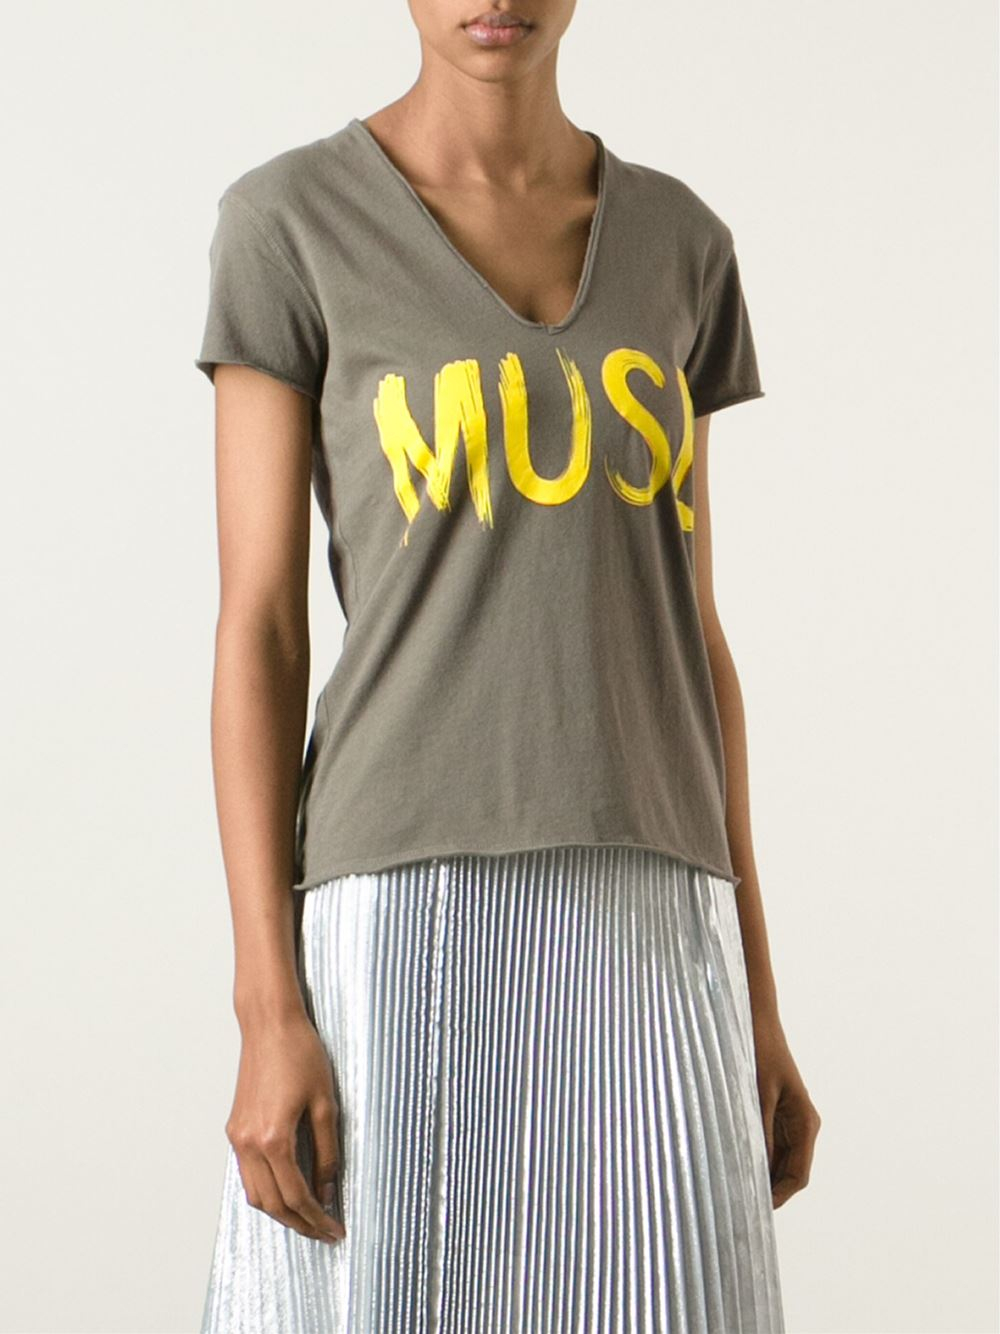 Lyst - Zadig & Voltaire 'Muse' Print T-Shirt in Green